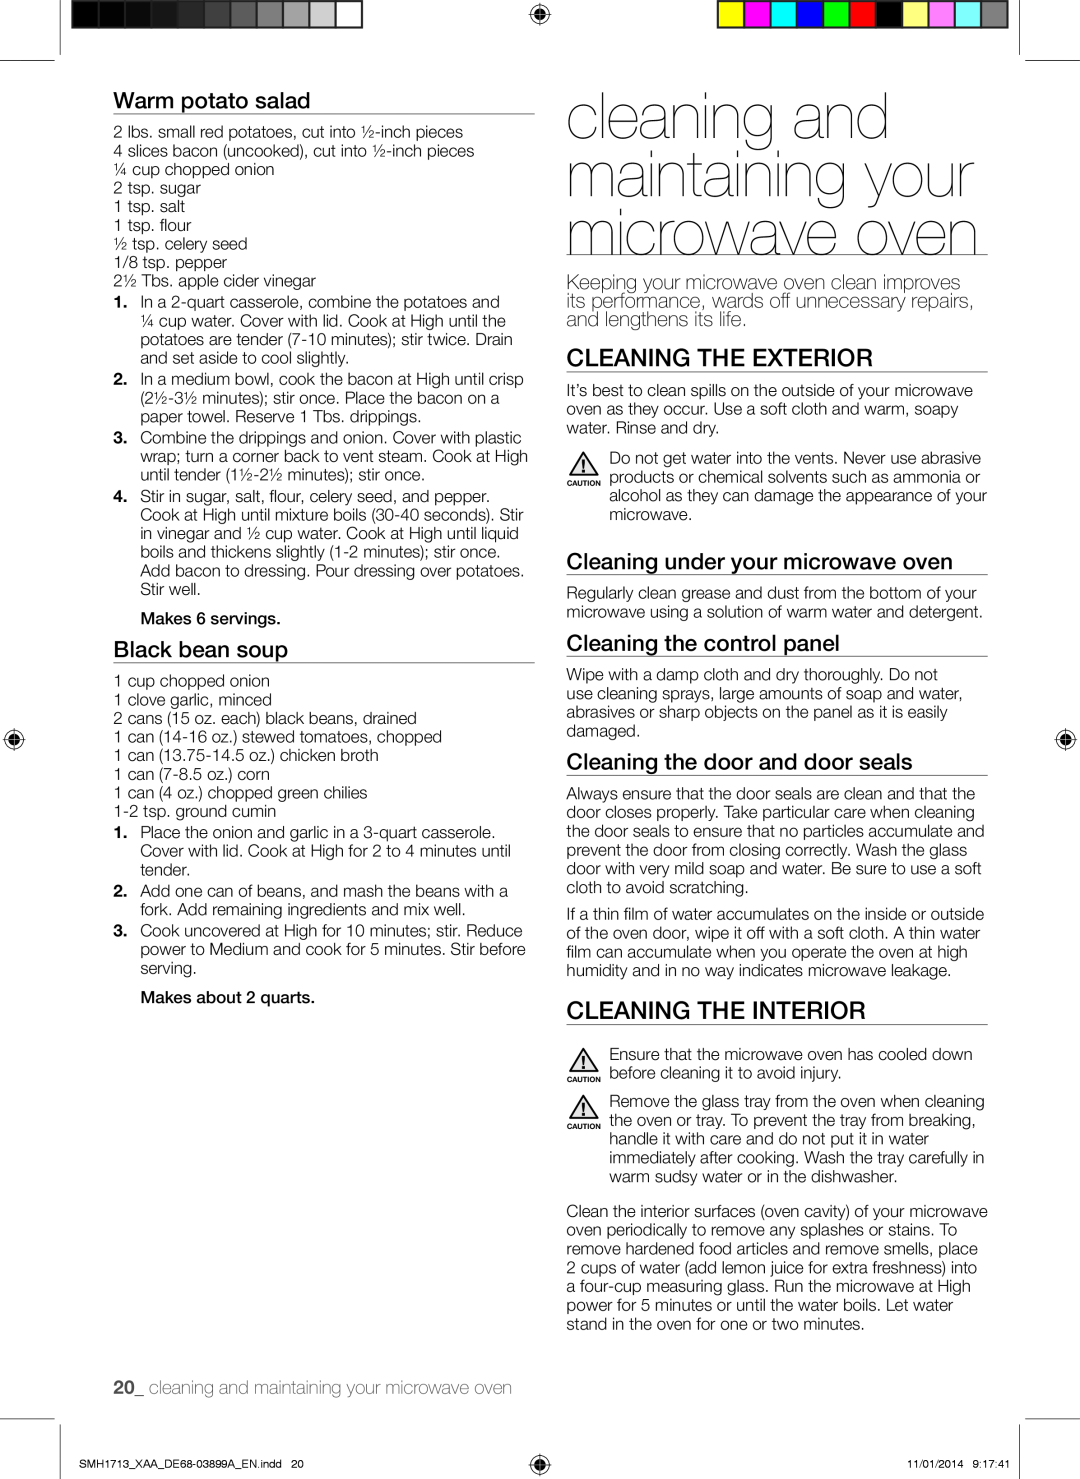 Samsung SMH1713 user manual cleaning and maintaining your microwave oven, Cleaning the exterior, Cleaning the interior 